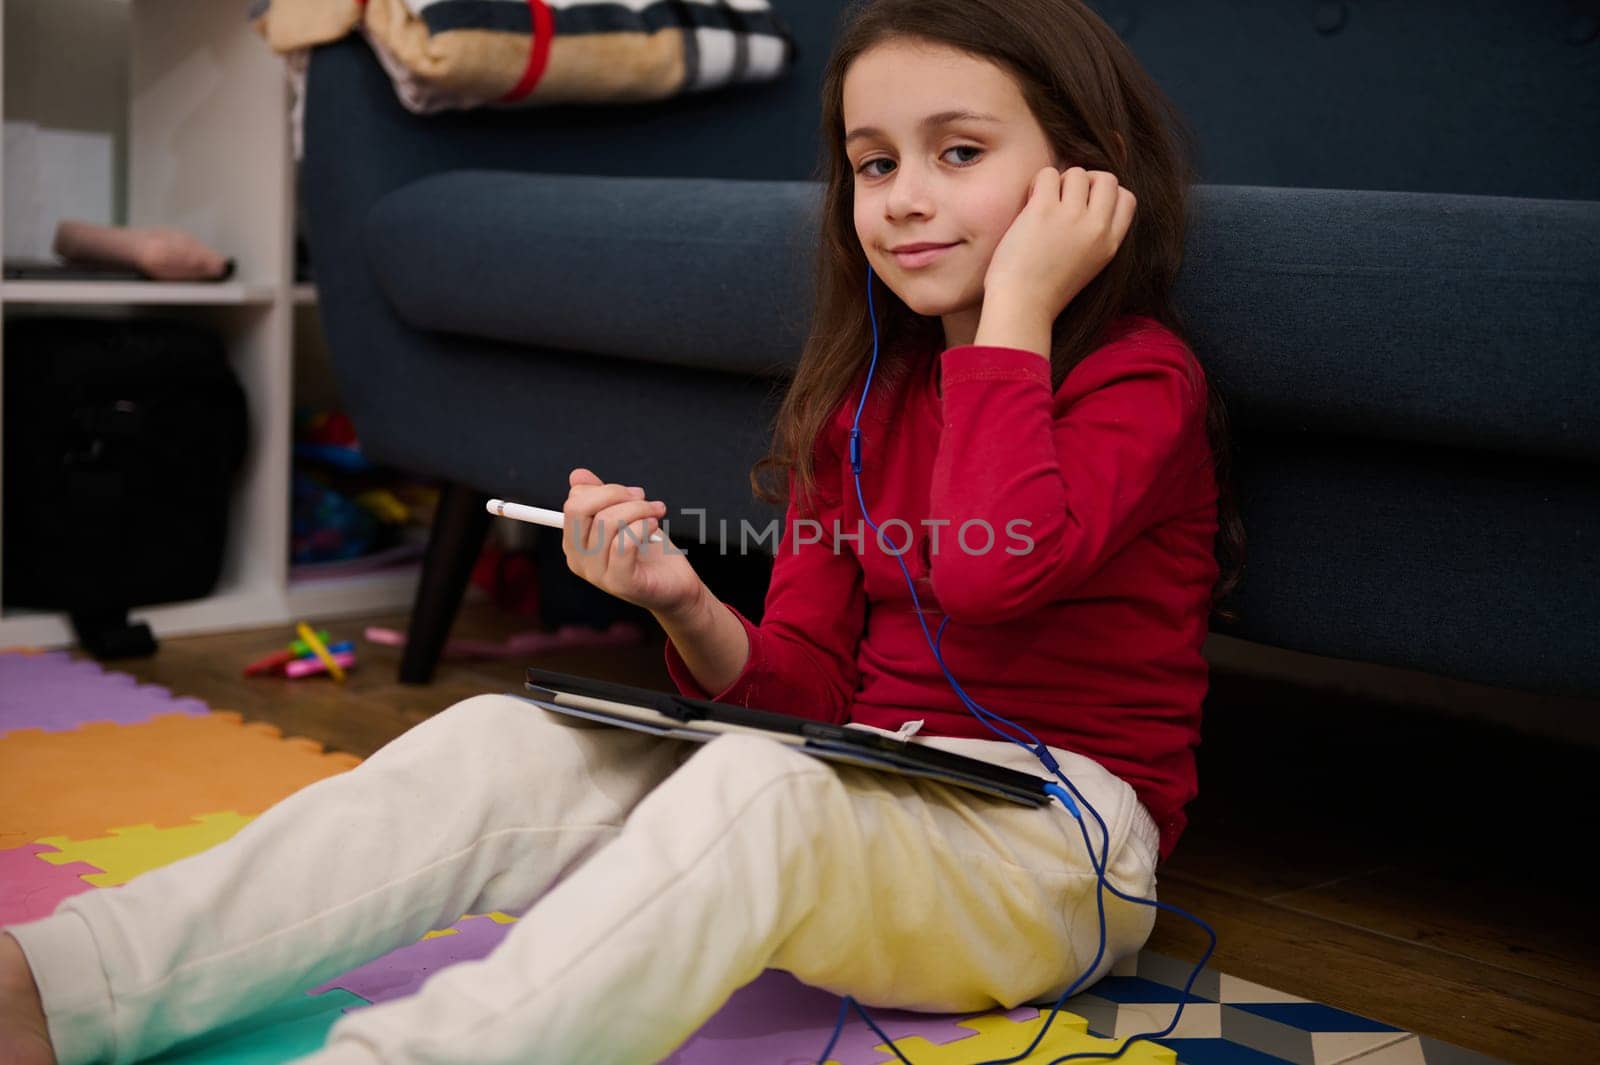 Portrait of a lovely child girl using digital tablet, studying online from home, smiling looking at camera, sitting on colorful puzzle carpet. Kids education. Distance learning. Autism. Diversity by artgf